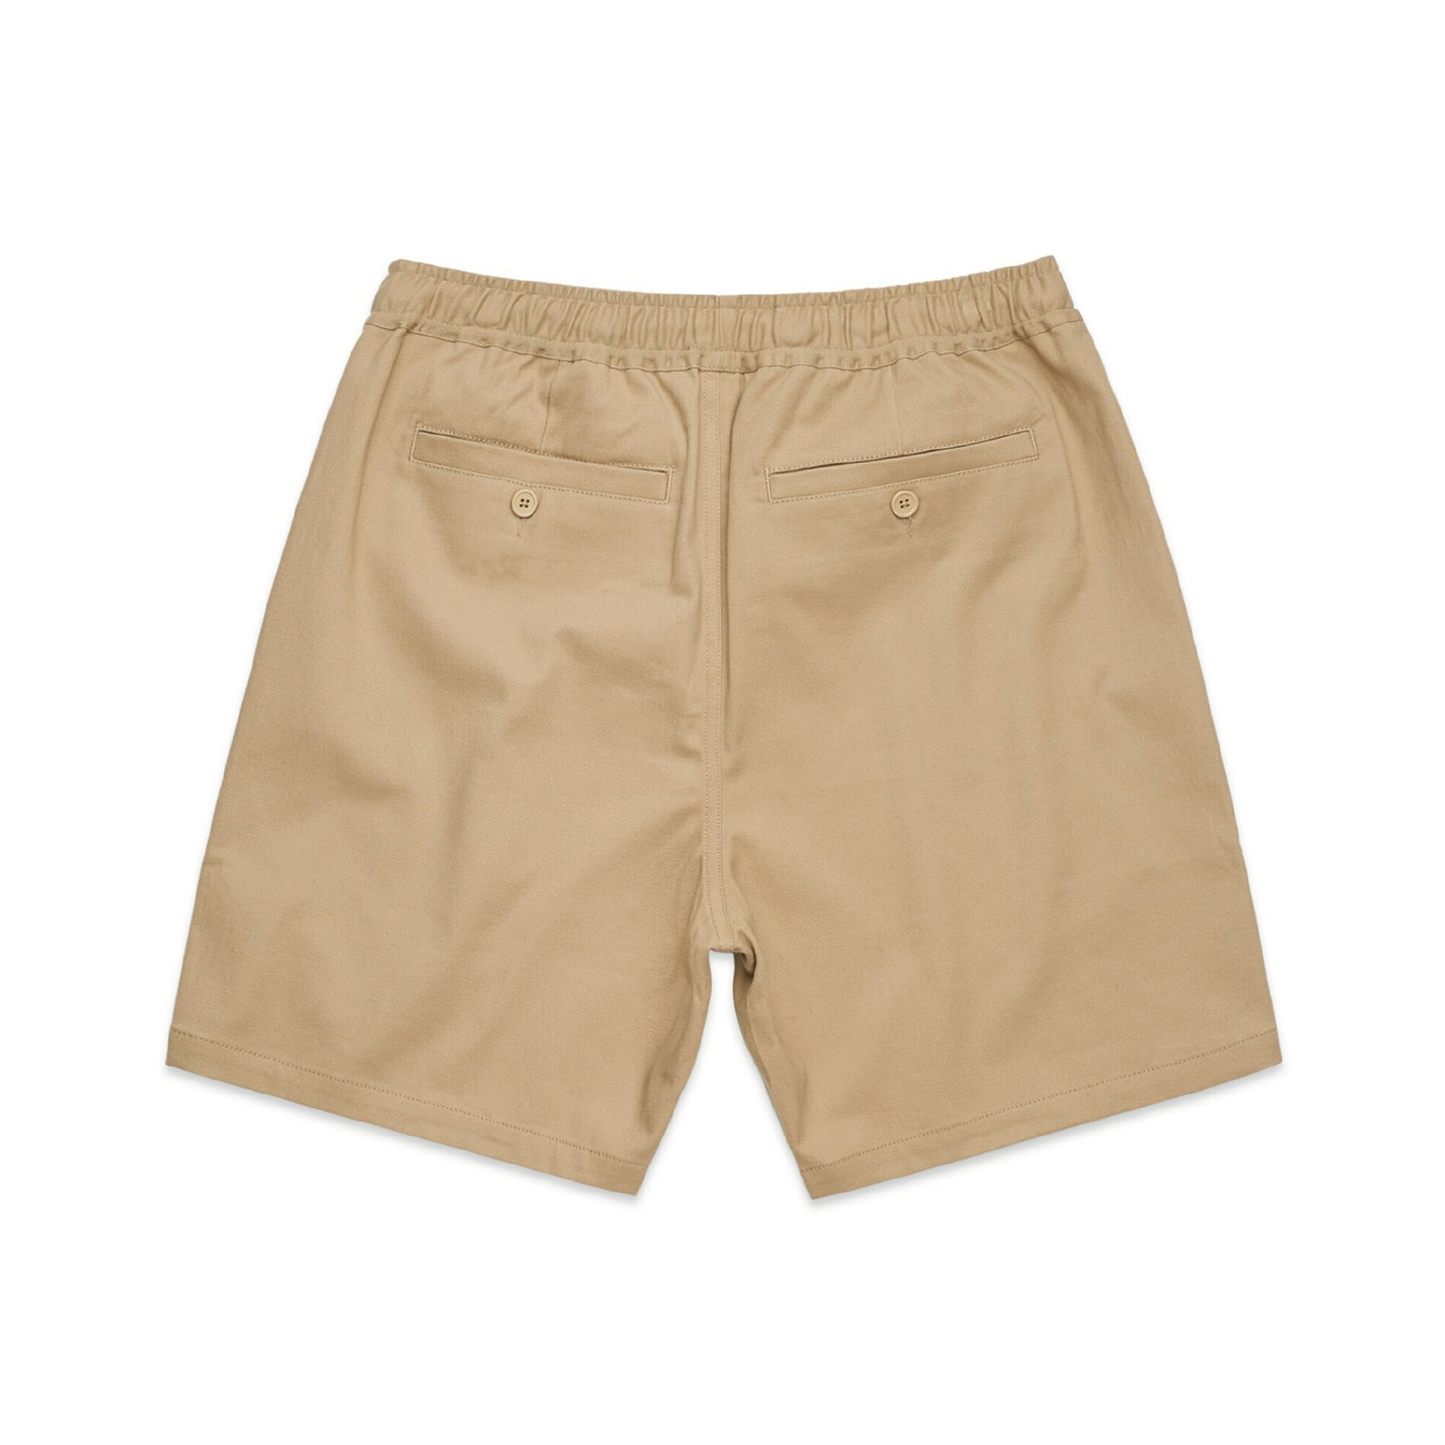 Embroidered Tan Shorts